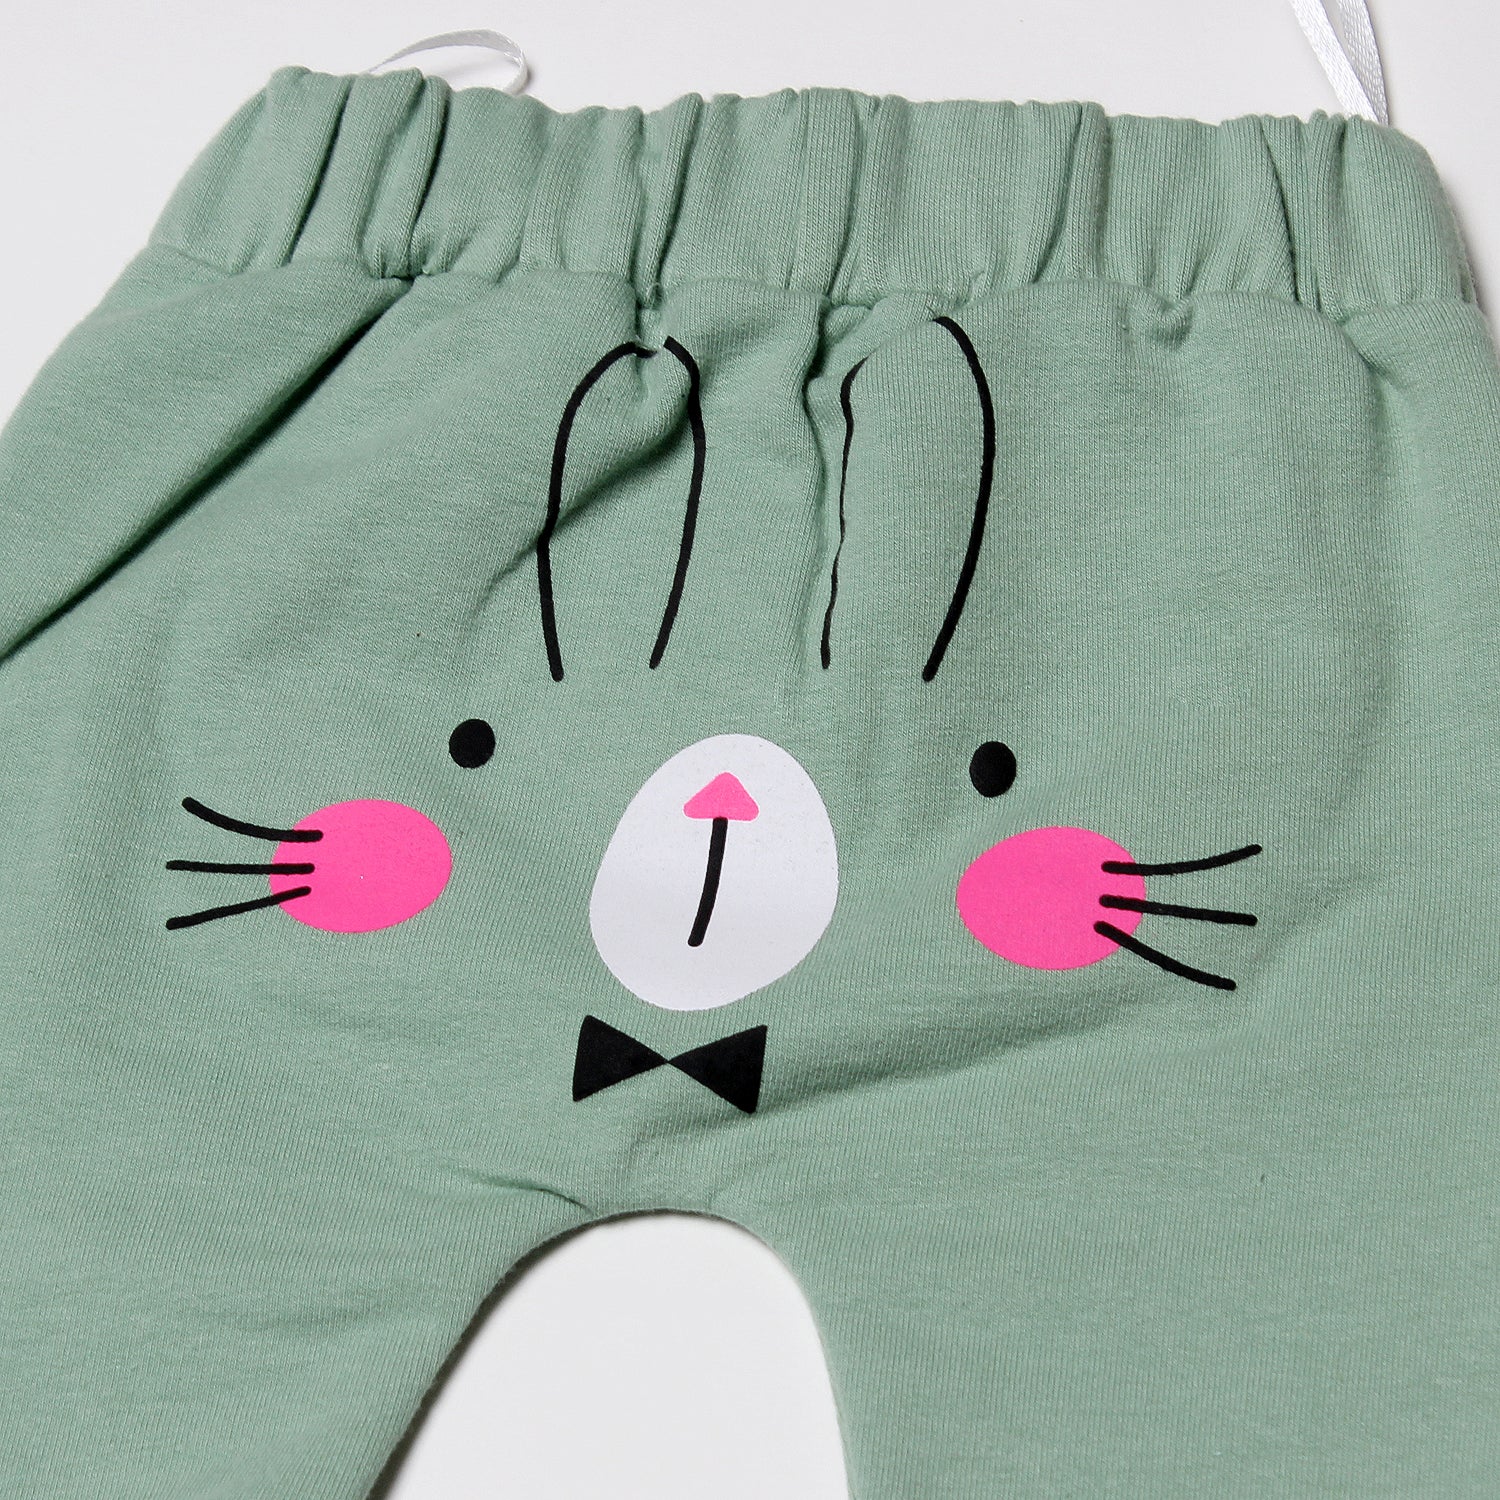 NEW PISTA GREEN RABBIT FACE PRINTED WITH POCKETS TROUSER